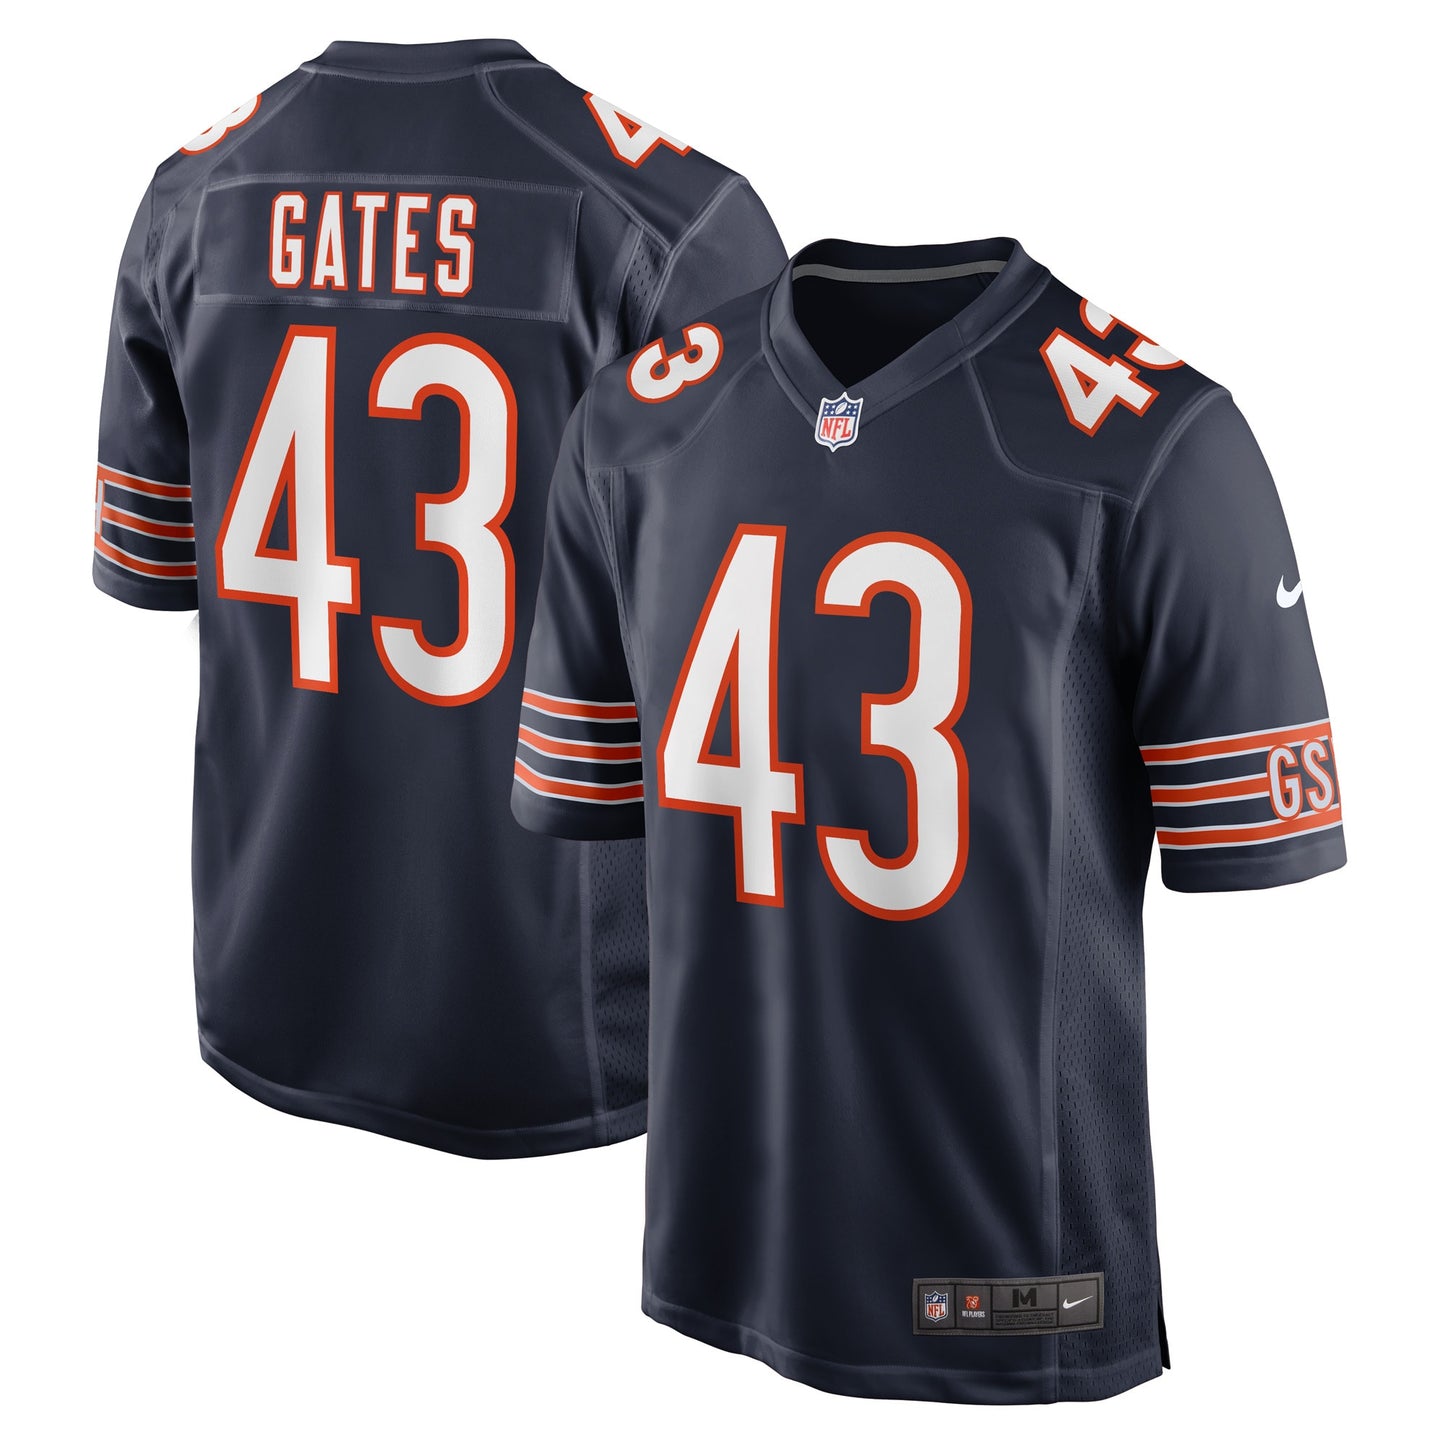 DeMarquis Gates Chicago Bears Nike Game Player Jersey - Navy